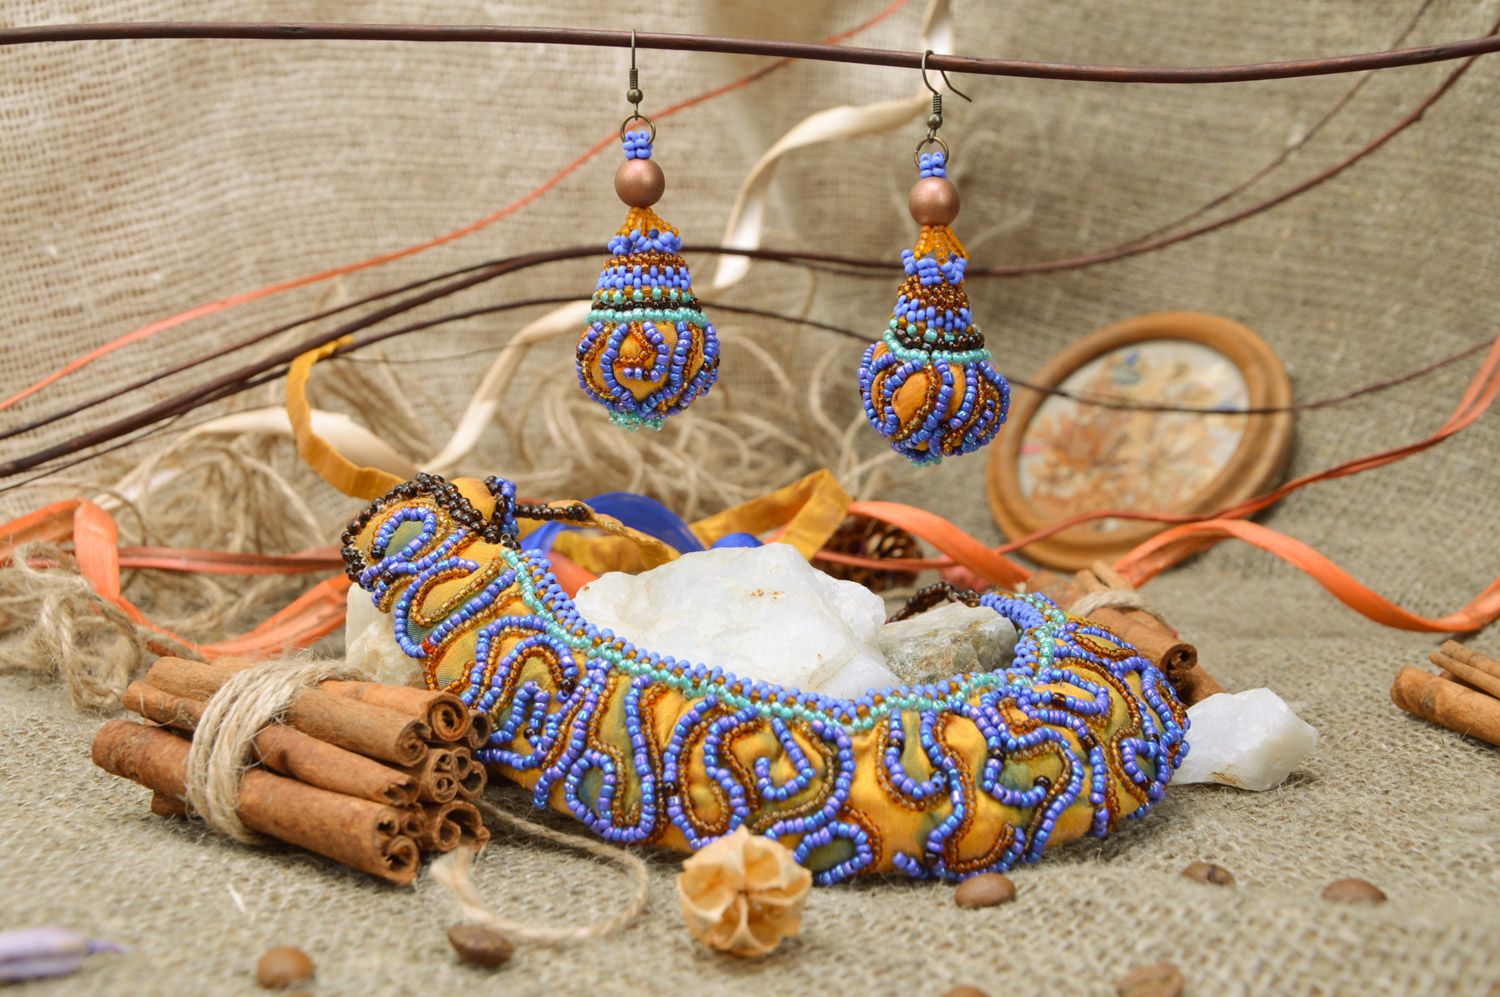 Beautiful handmade women's jewelry set 2 items earrings and necklace woven of beads and fabric photo 1